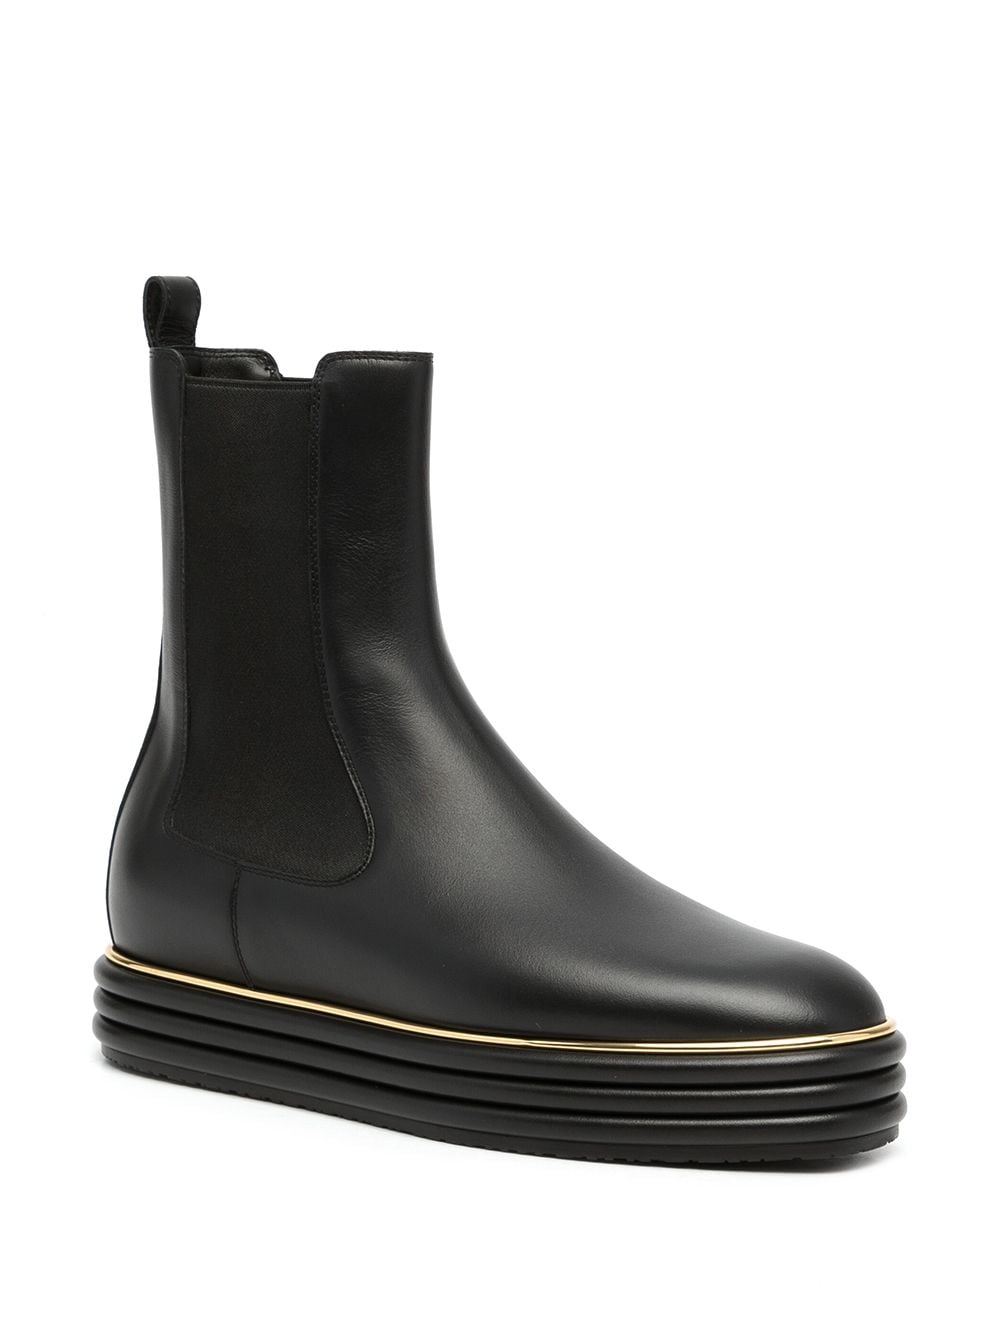 Bally Chelsea Ankle Boots - Farfetch